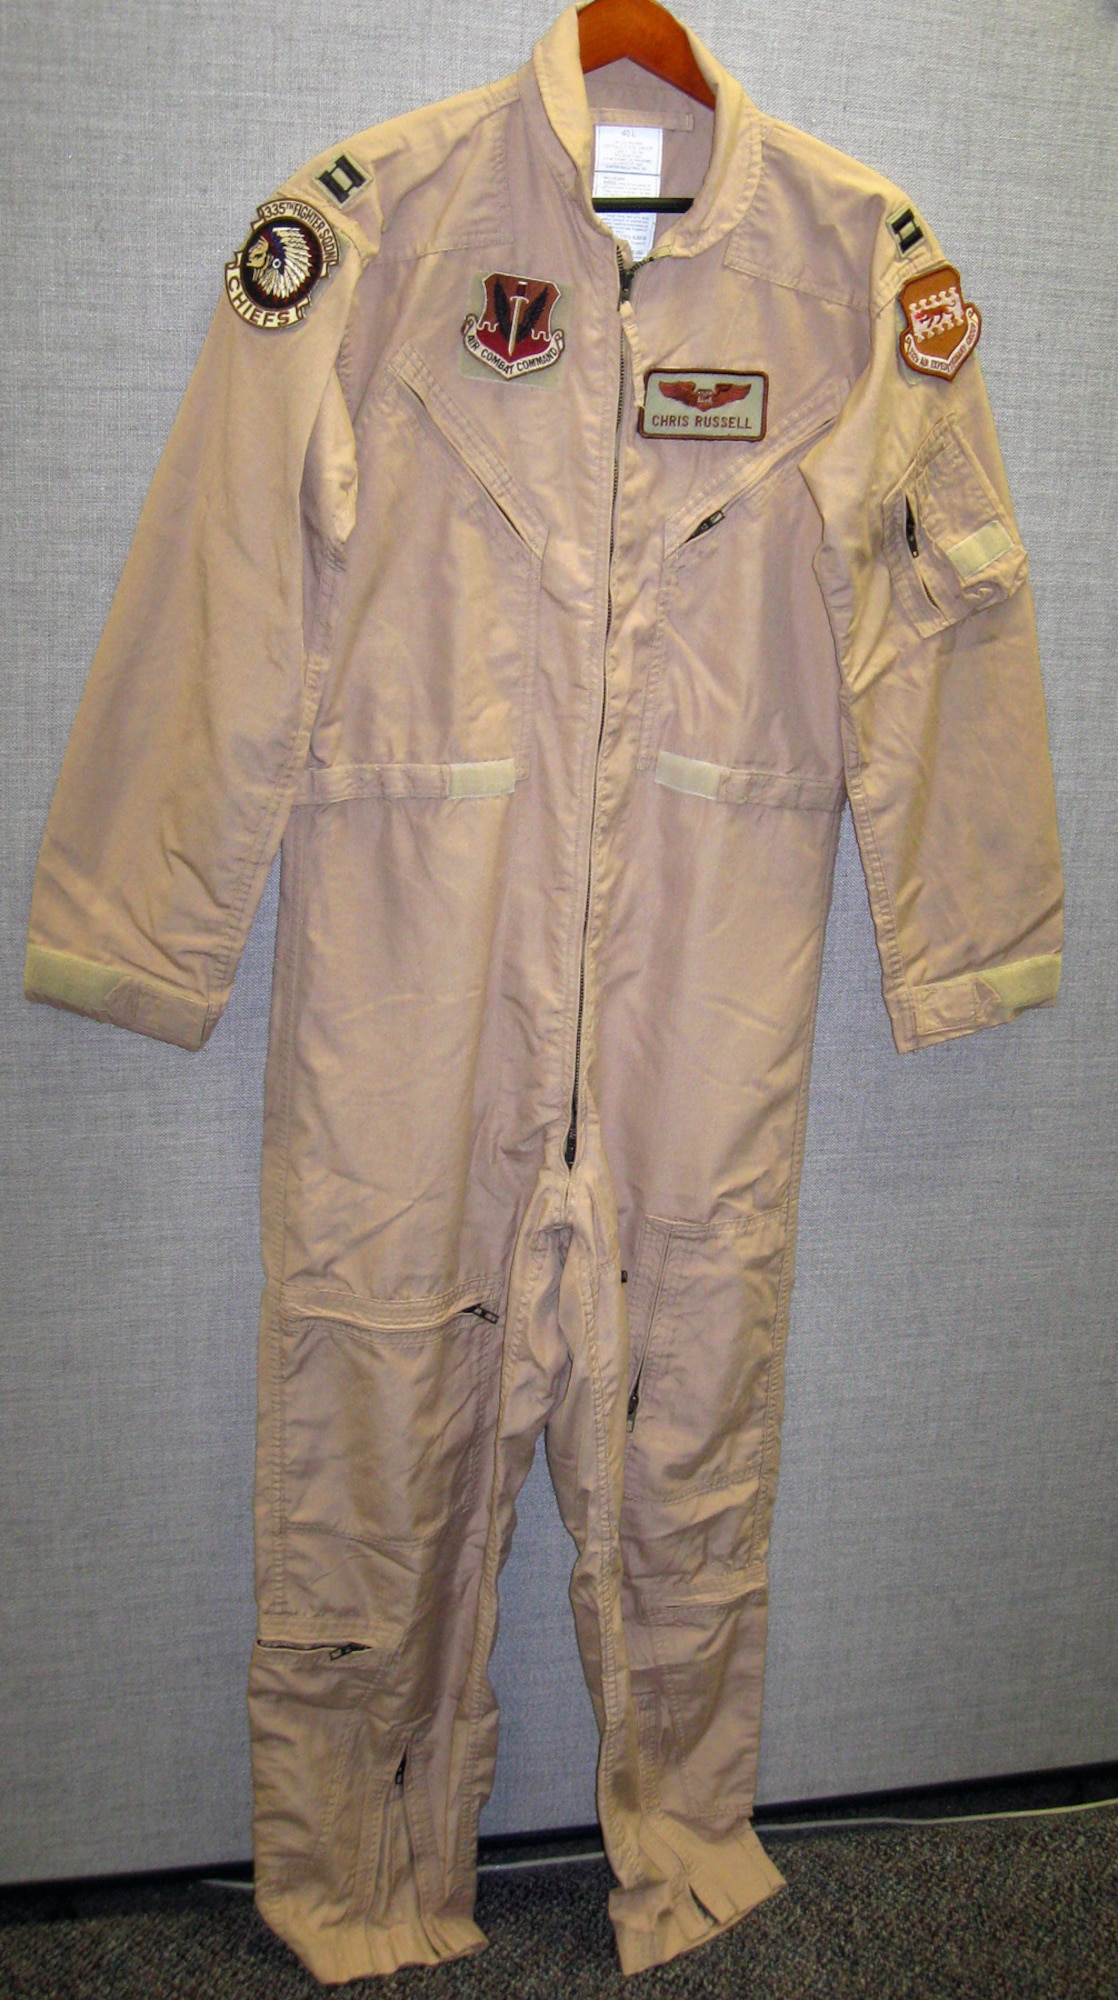 These coveralls were worn by the donor, who flew an emergency close air support mission on March 4, 2002, in his F-15E to defend the Special Operations team on the mountain Takur Ghar in Afghanistan. (U.S. Air Force photo)